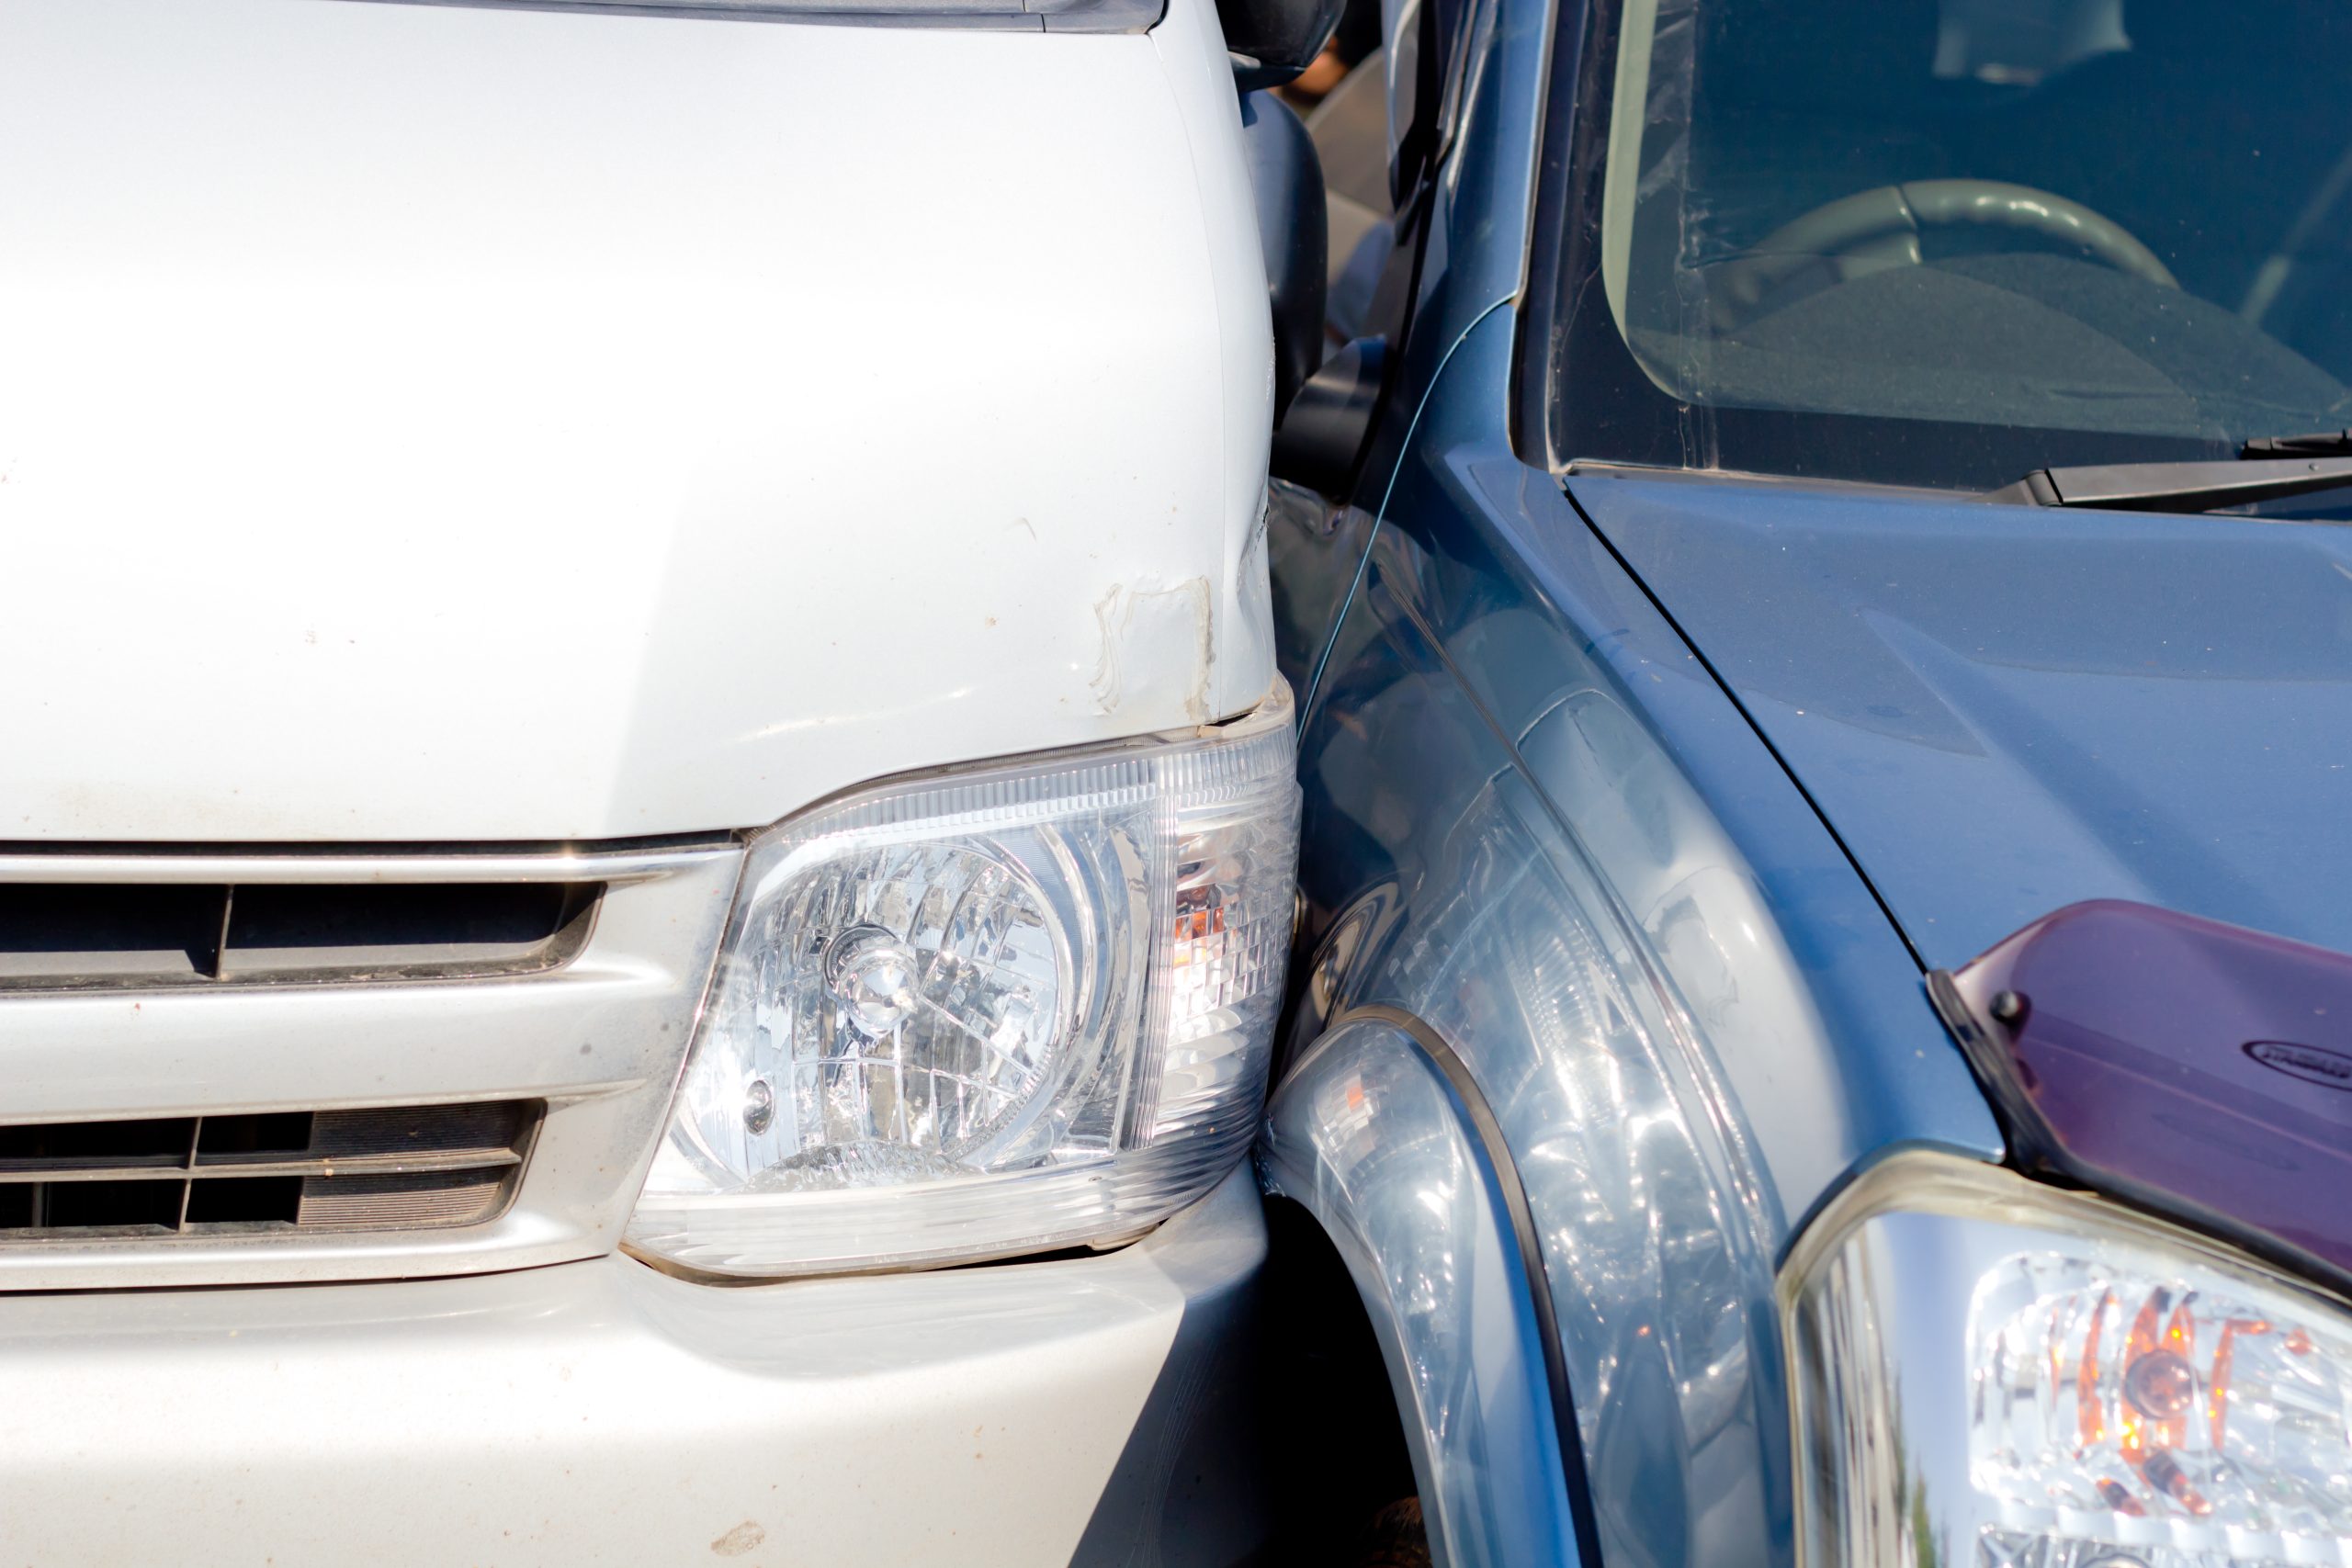 Should I Get a Lawyer for a Minor Car Accident in Arizona?